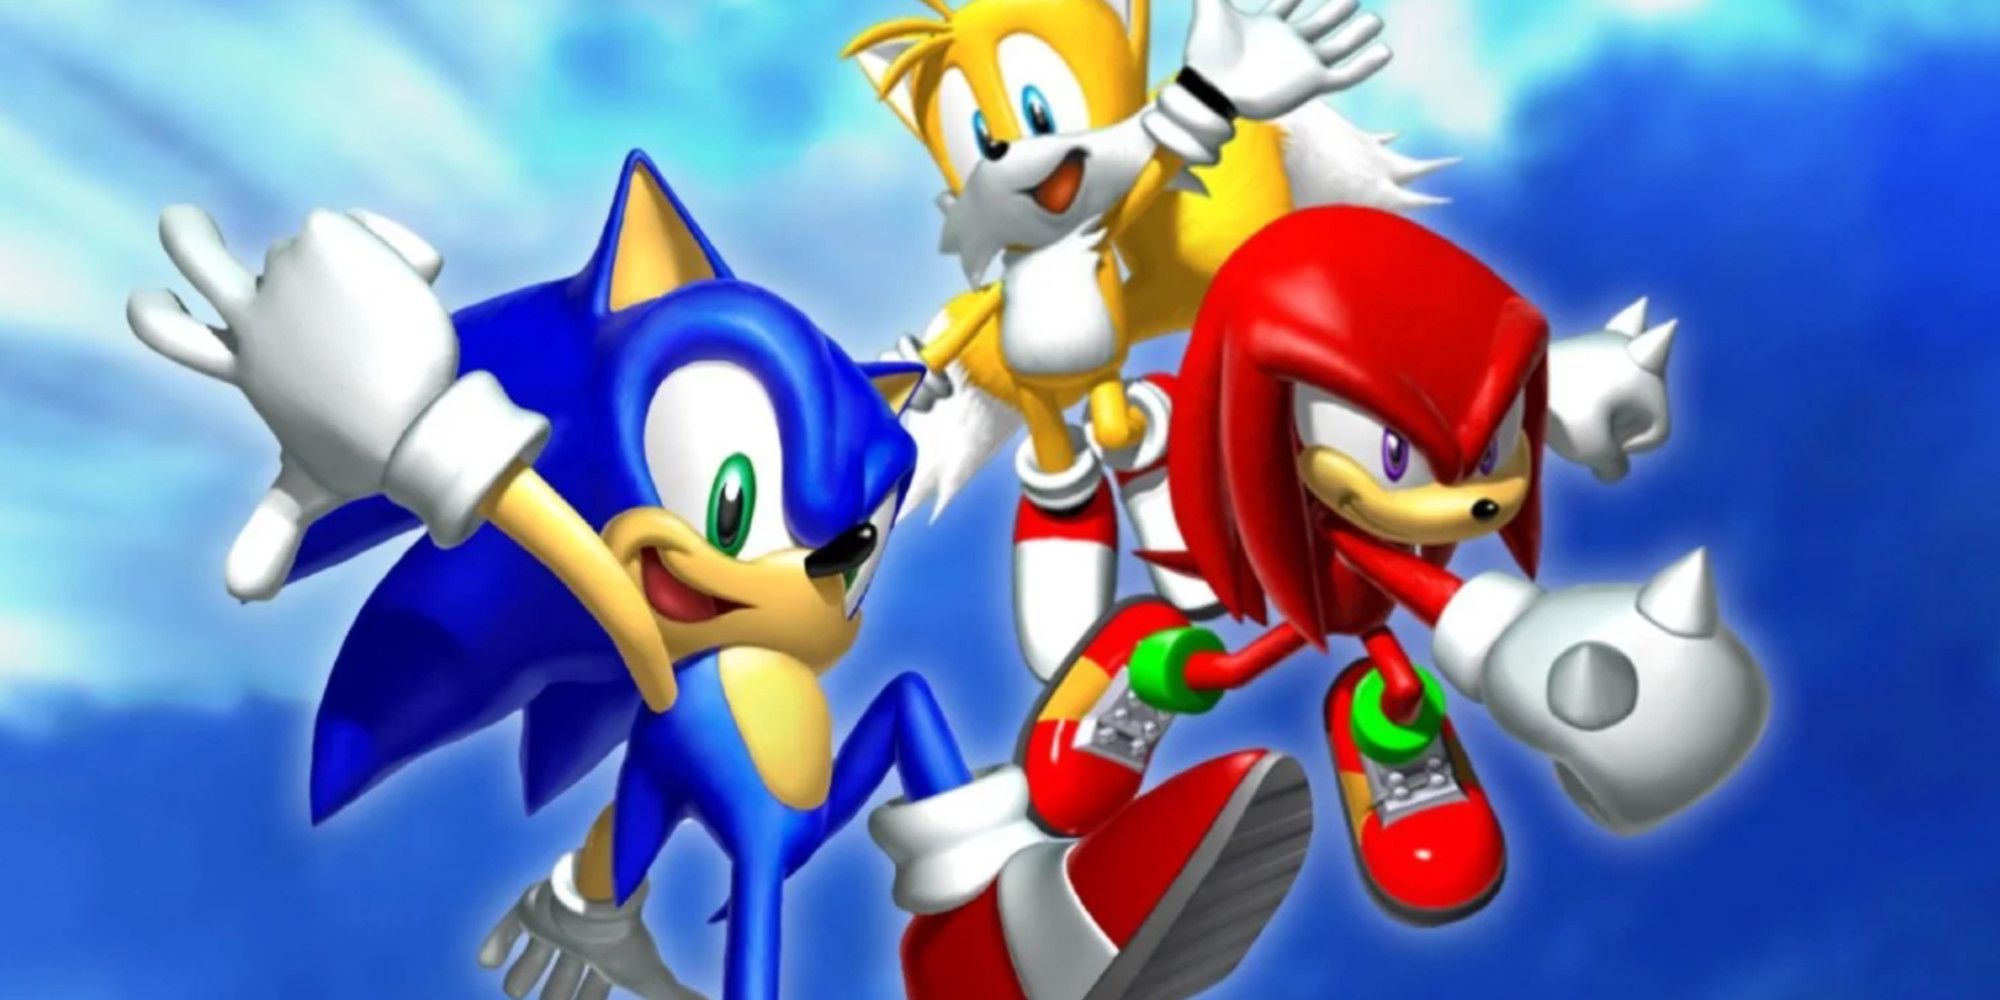 Sonic, Tails, and Knuckles jumping and posing in the air